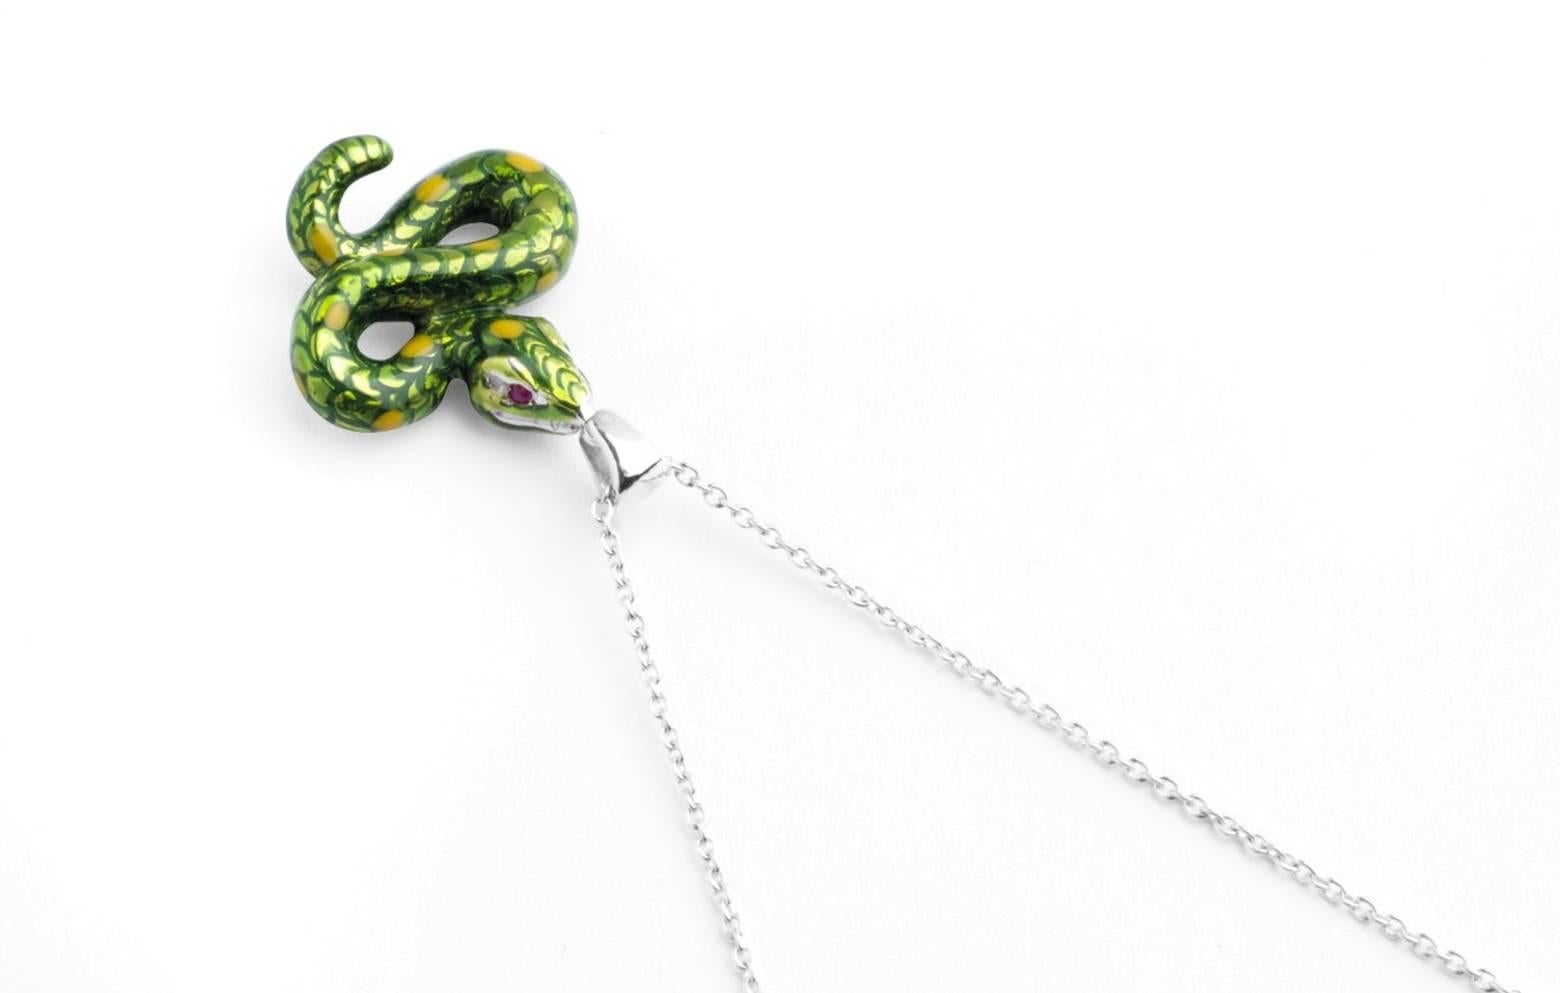 

The sterling silver snake pendant has a green enamel finish and is fitted on to a 15